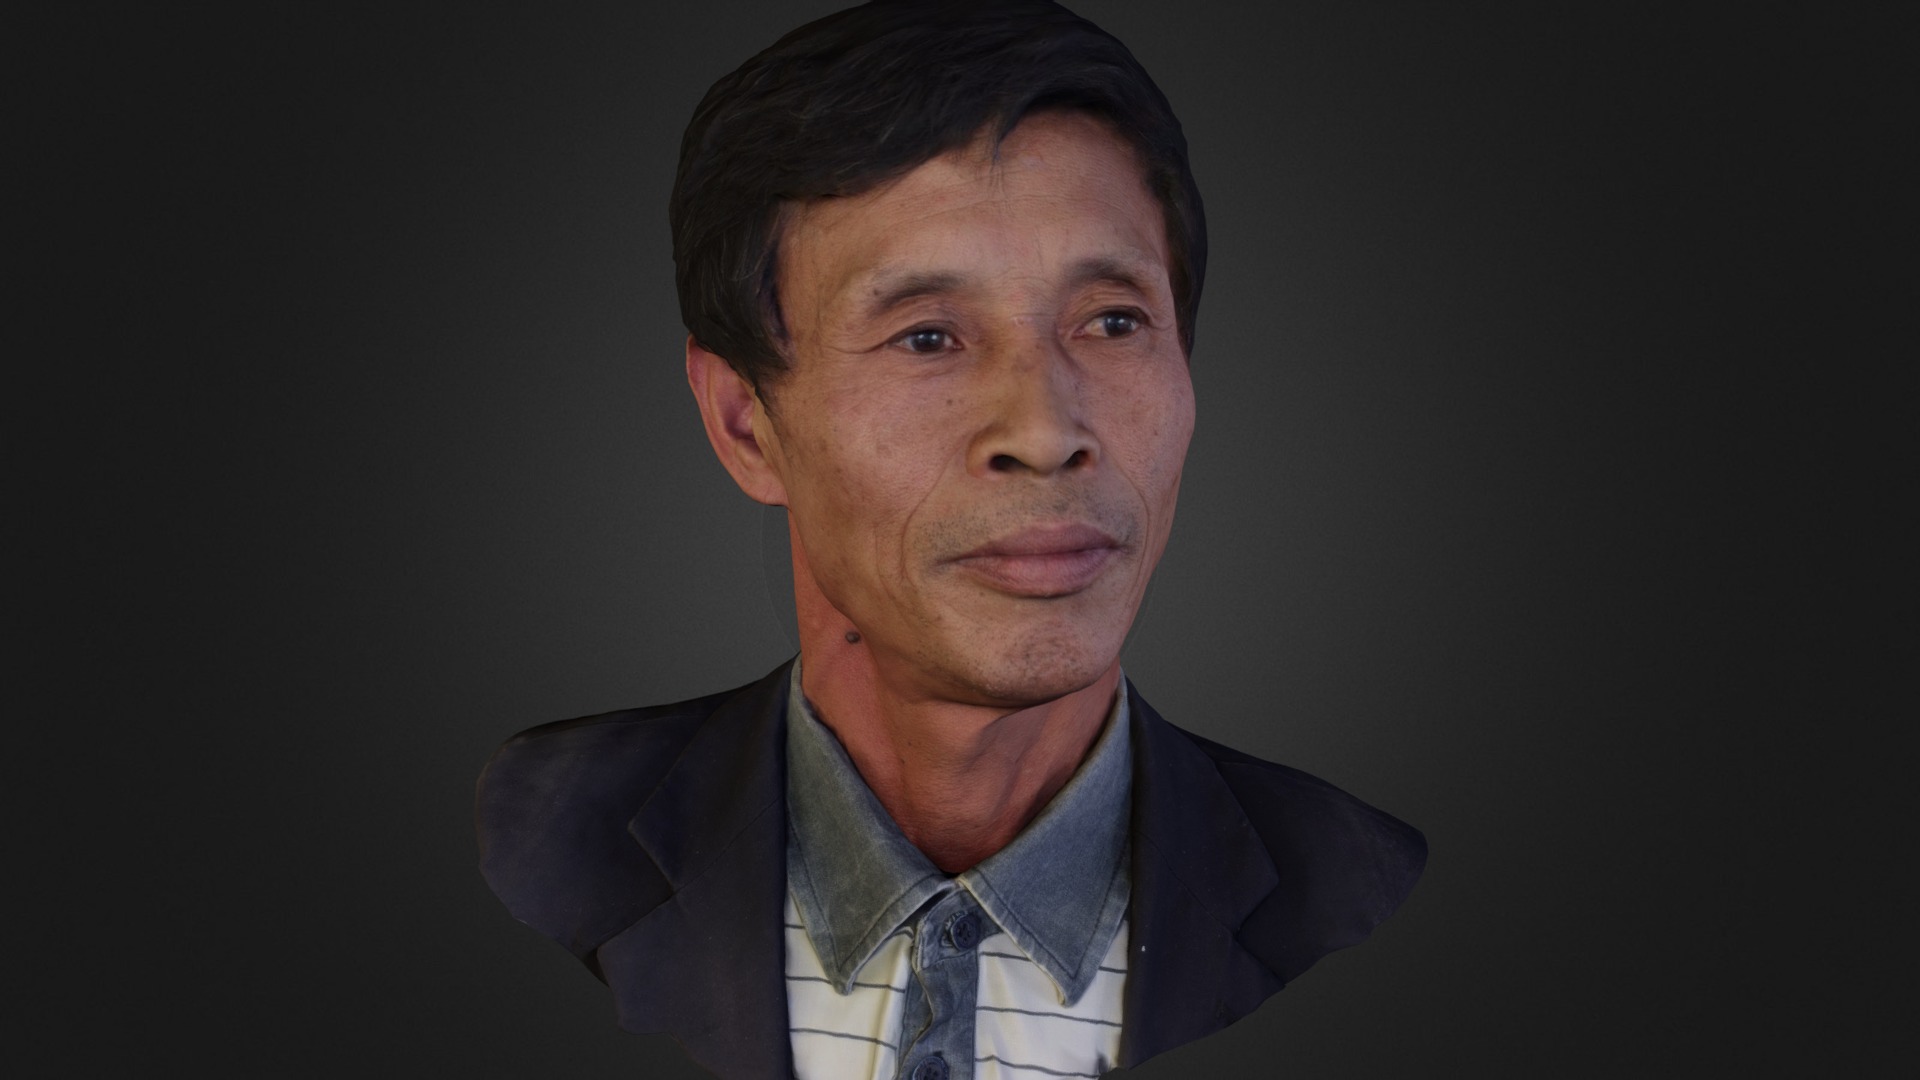 Human face scan

shutter speed : 1/ 10 s 

providing technical support

contact me at dmc@sina.com - Manhead02 - 3D model by amaze3d 3d model